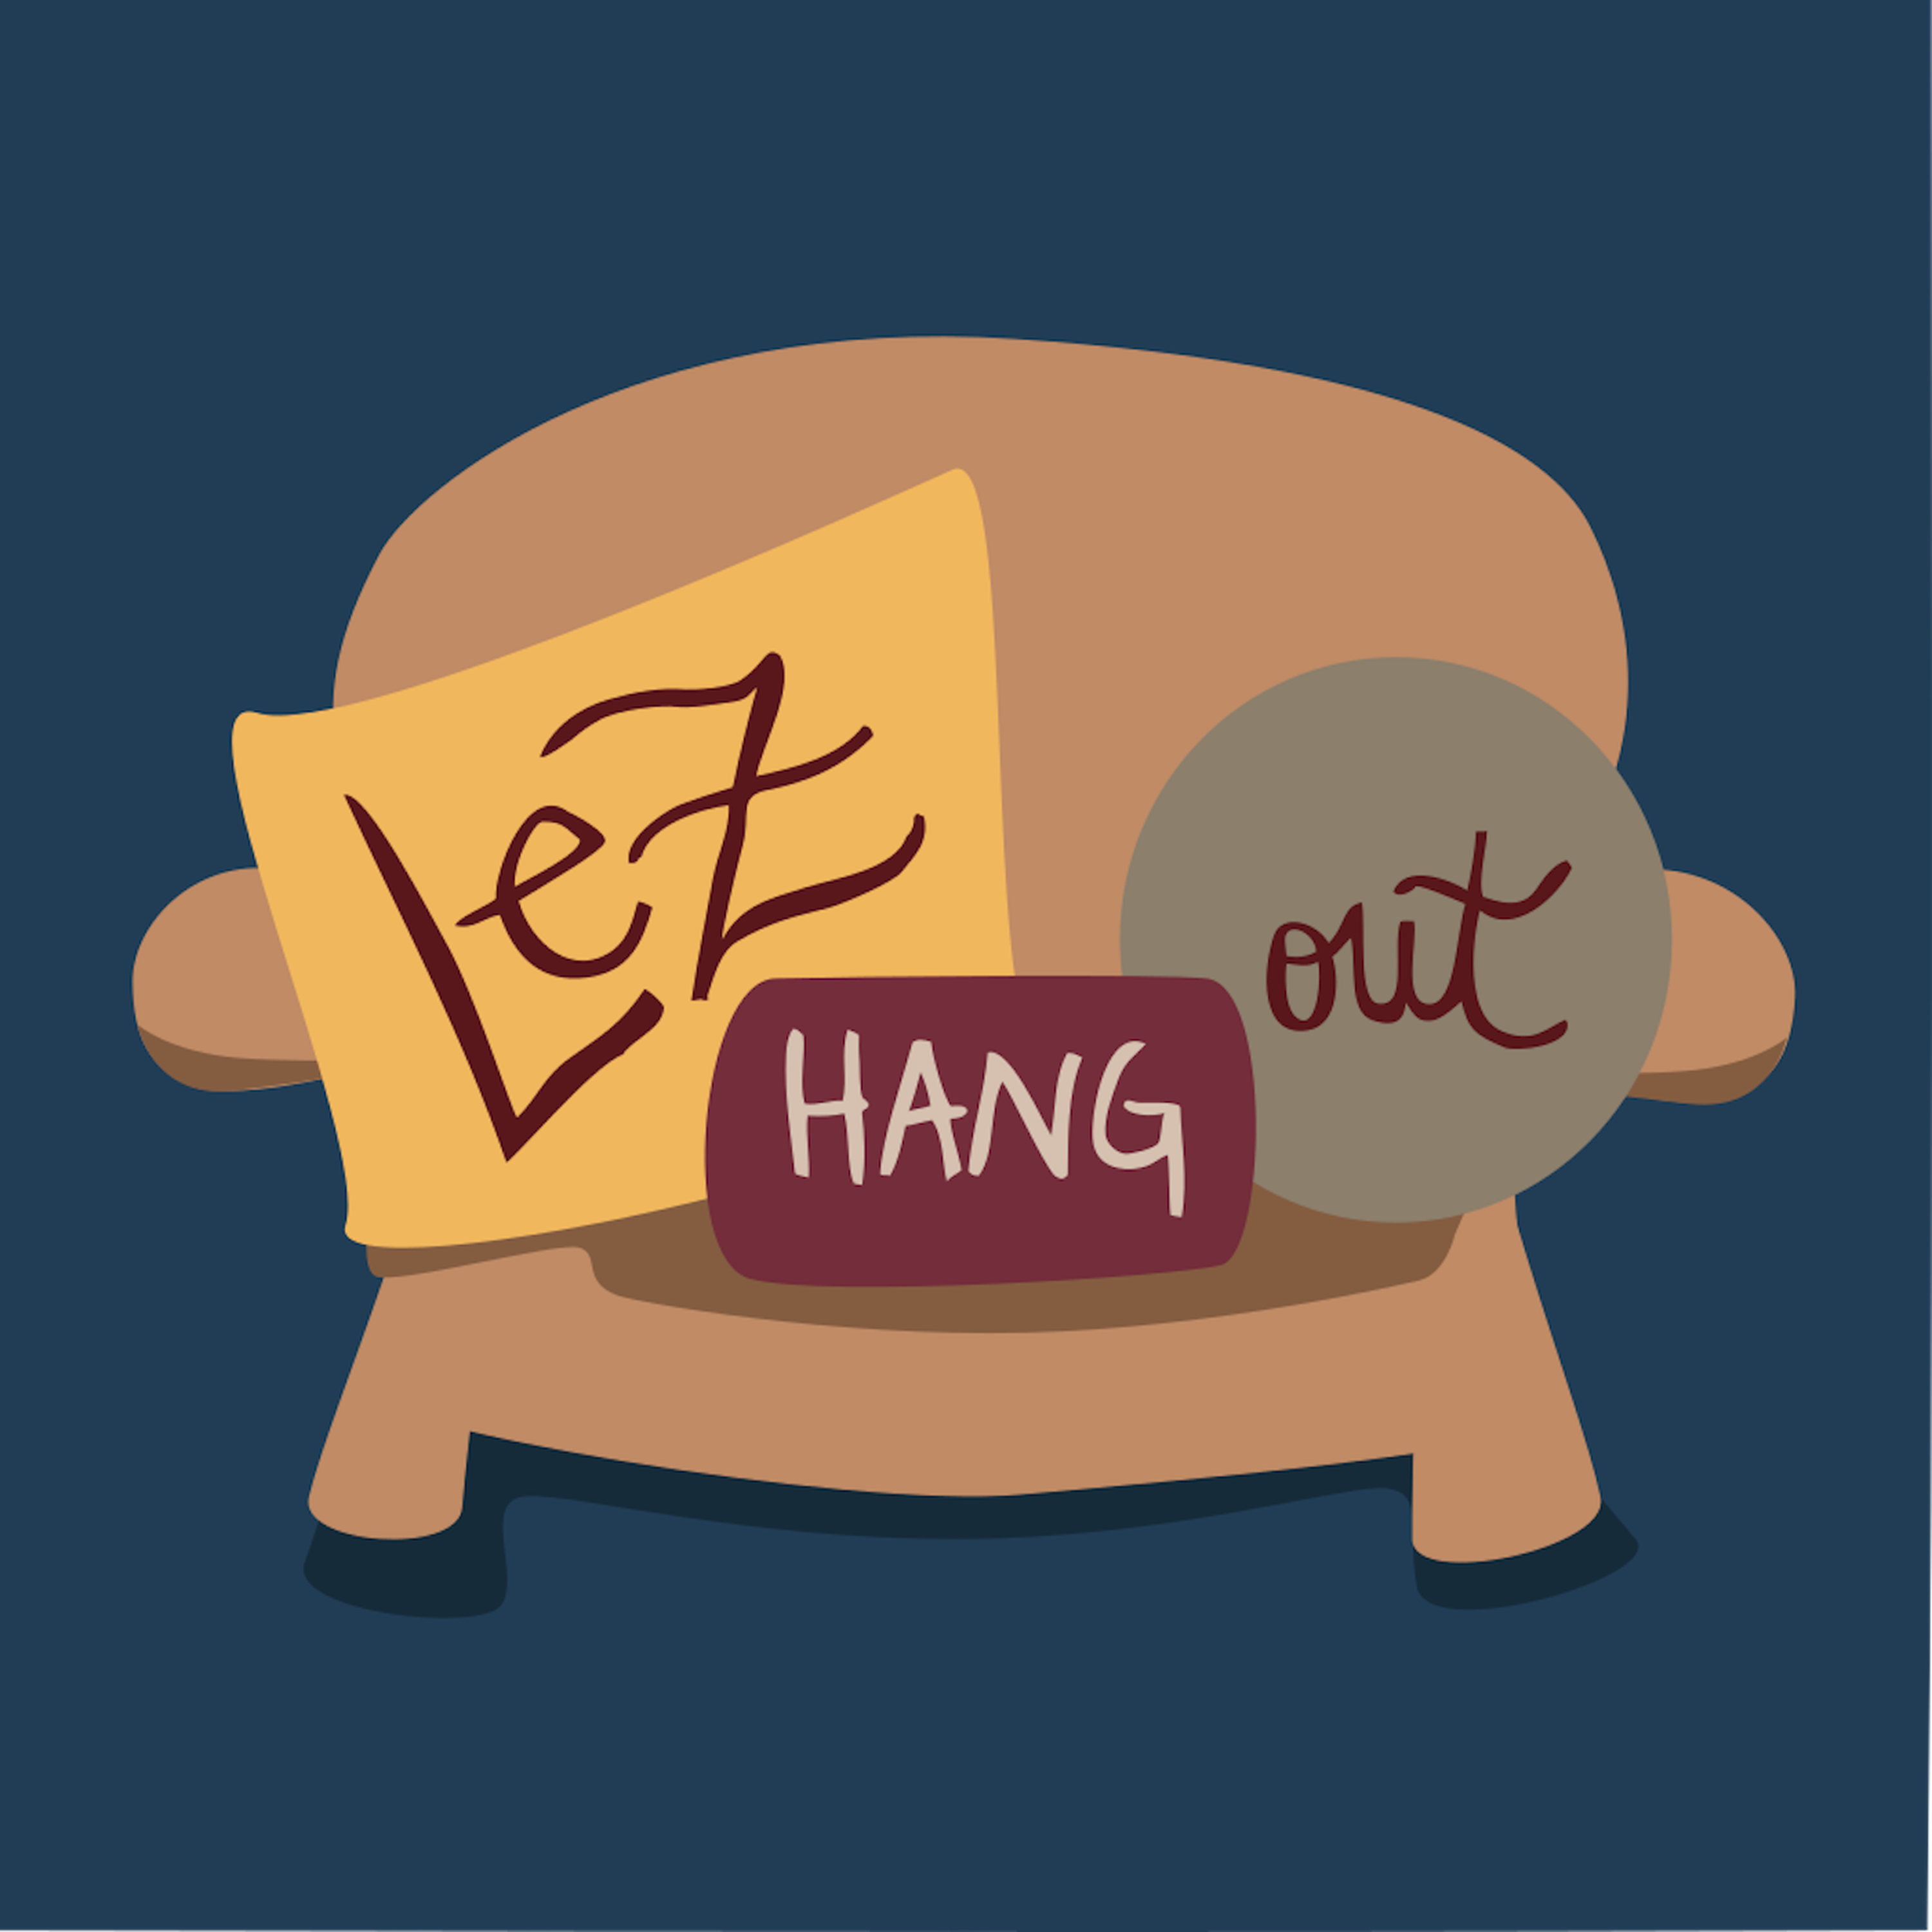 Lez Hang Out | A Lesbian Podcast - SBG 43: LIVE from the Virgil with Elise Bauman and Ashly Perez: SBG 40 Days &amp; 40 Nights, Spice World &amp; Terminator Dark Fate